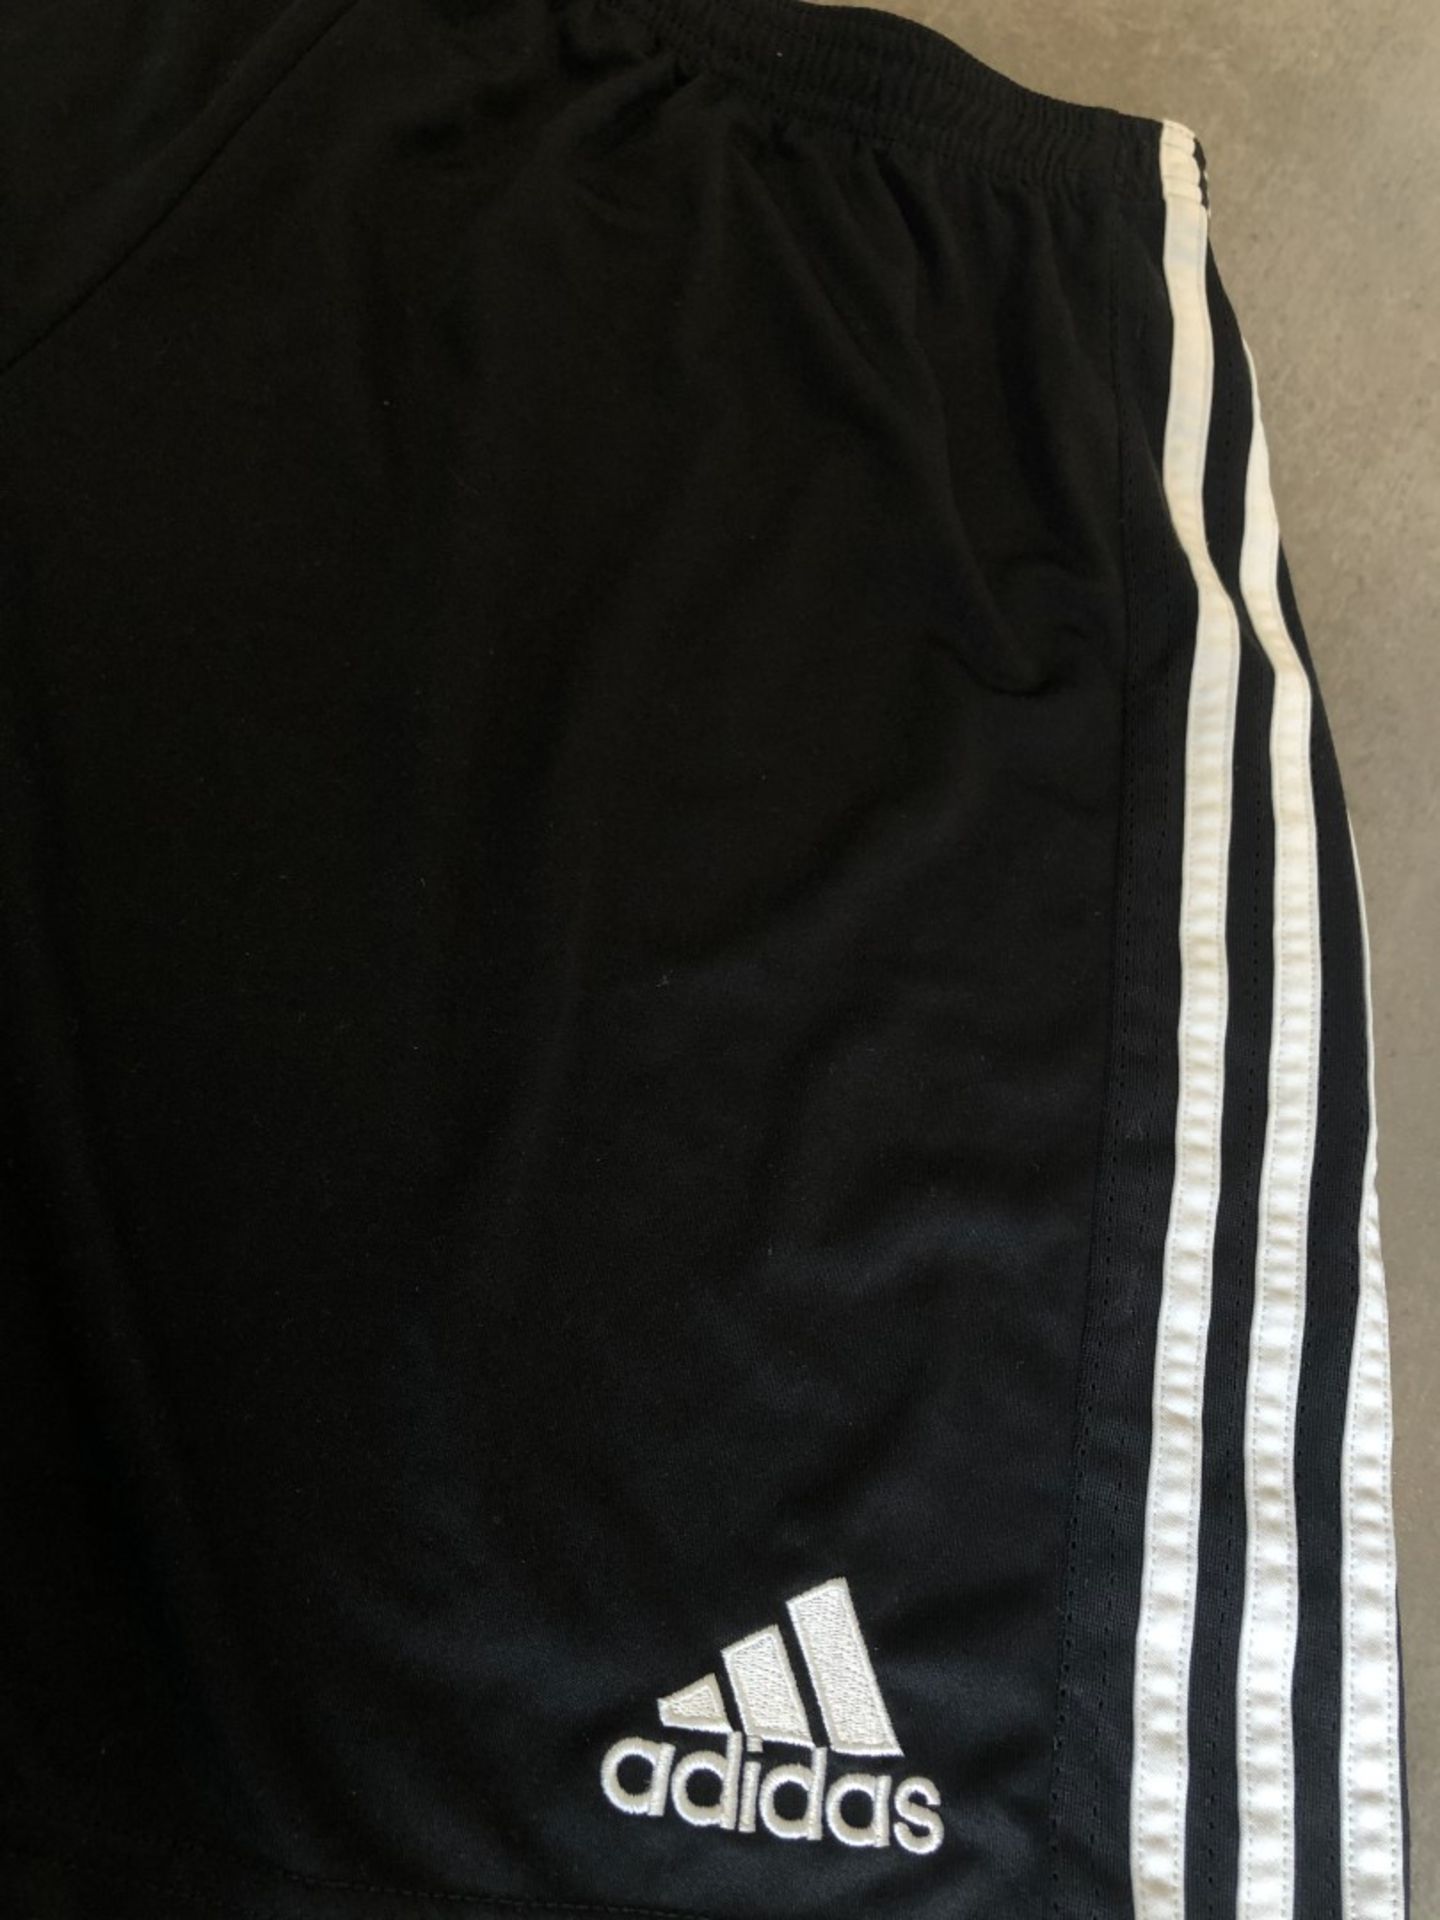 4 x Assorted Pairs Of Men's Genuine Adidas Shorts - AllIn Black - Sizes: L-XL - Preowned - Image 11 of 23